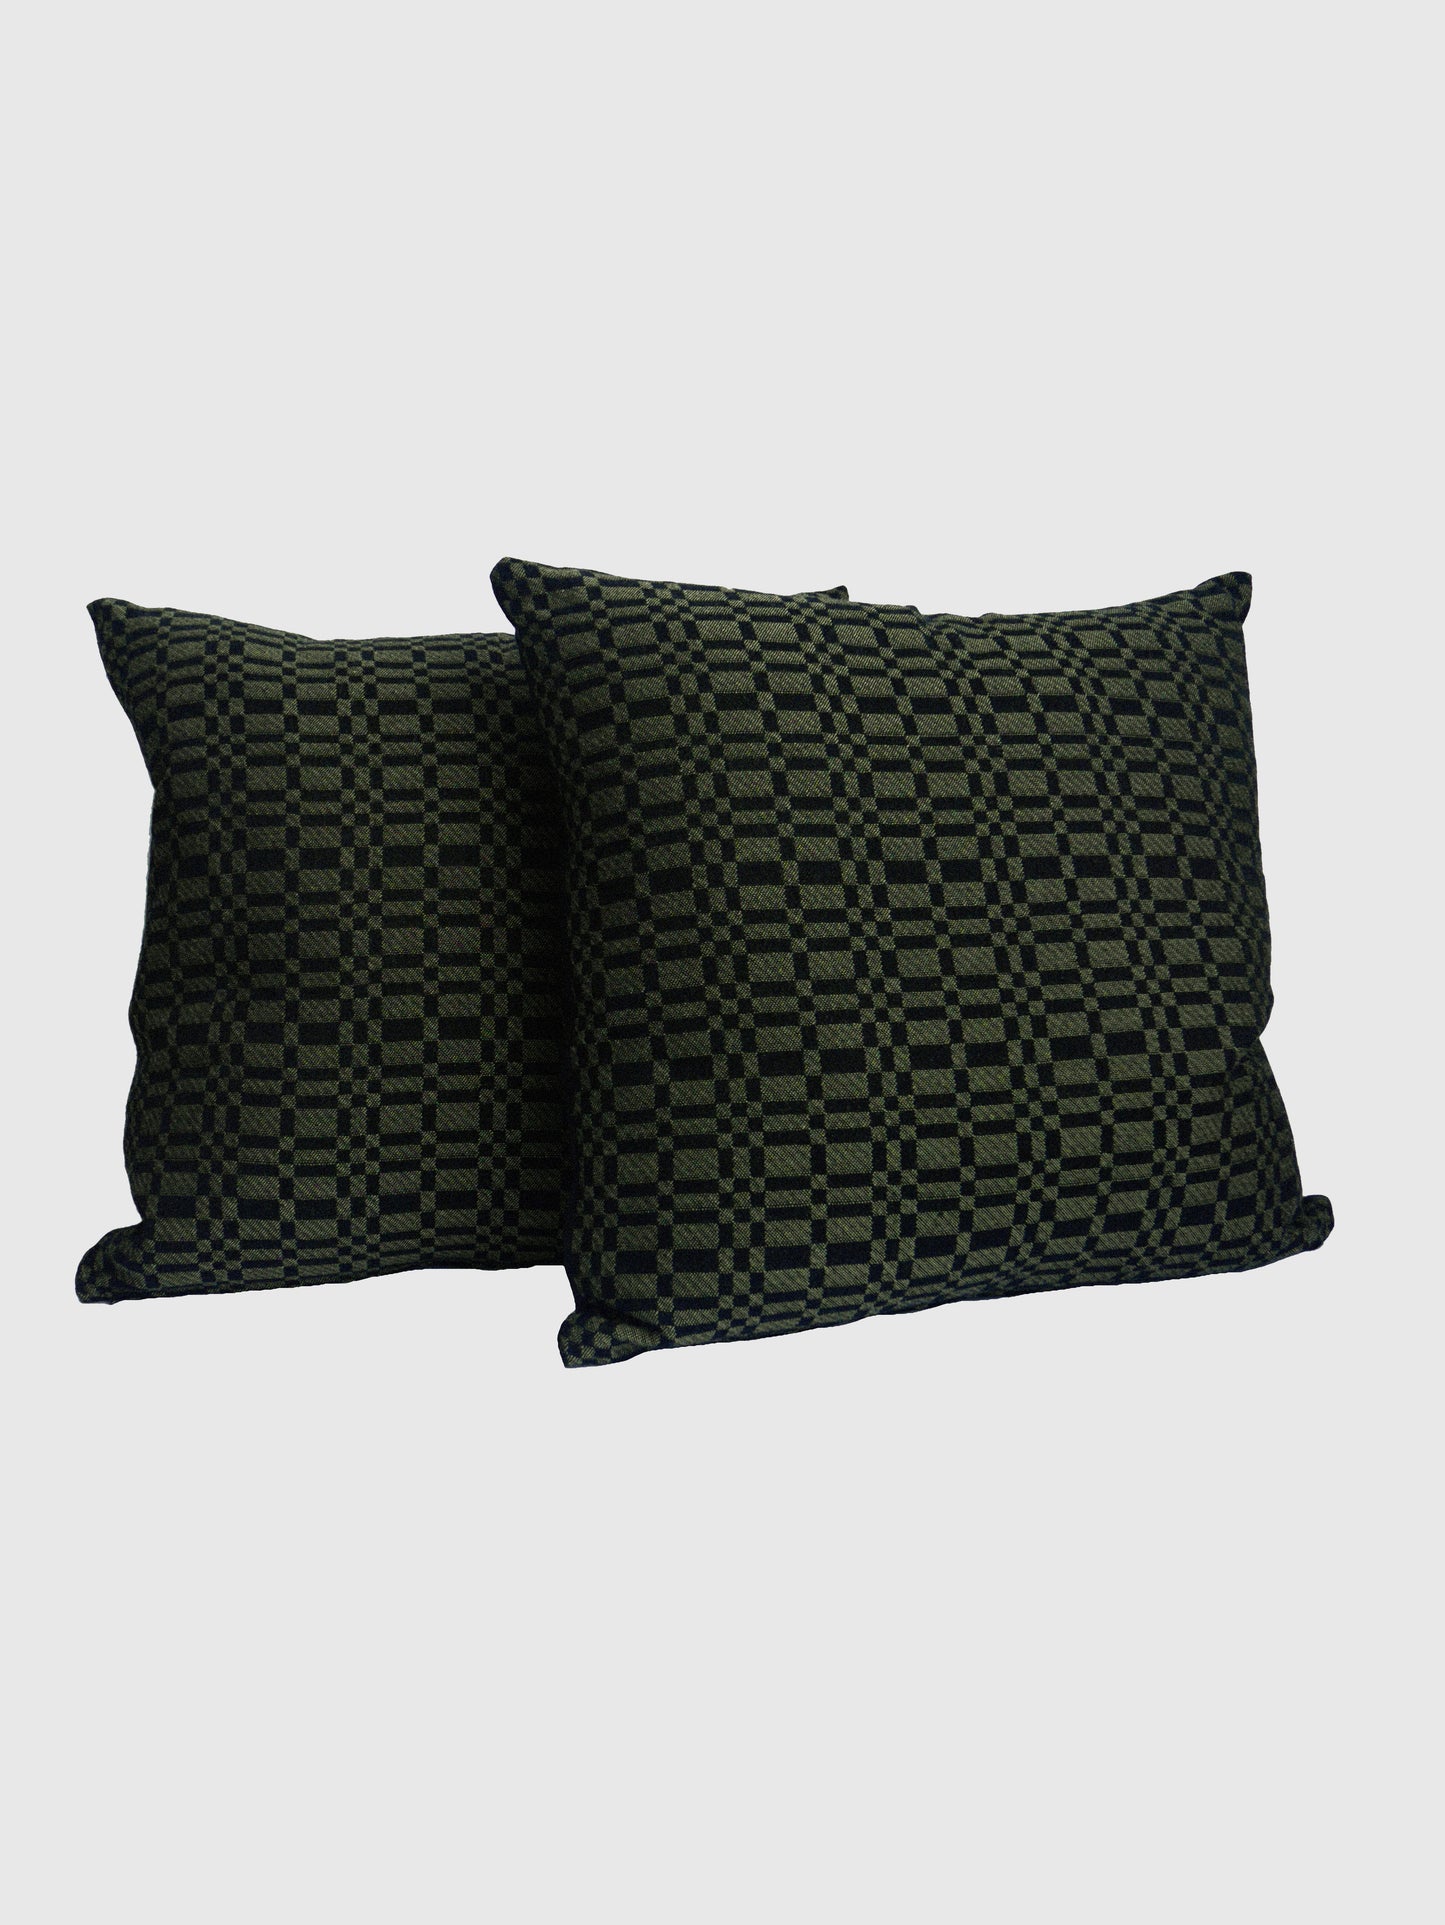 18" square pillow by emma harling